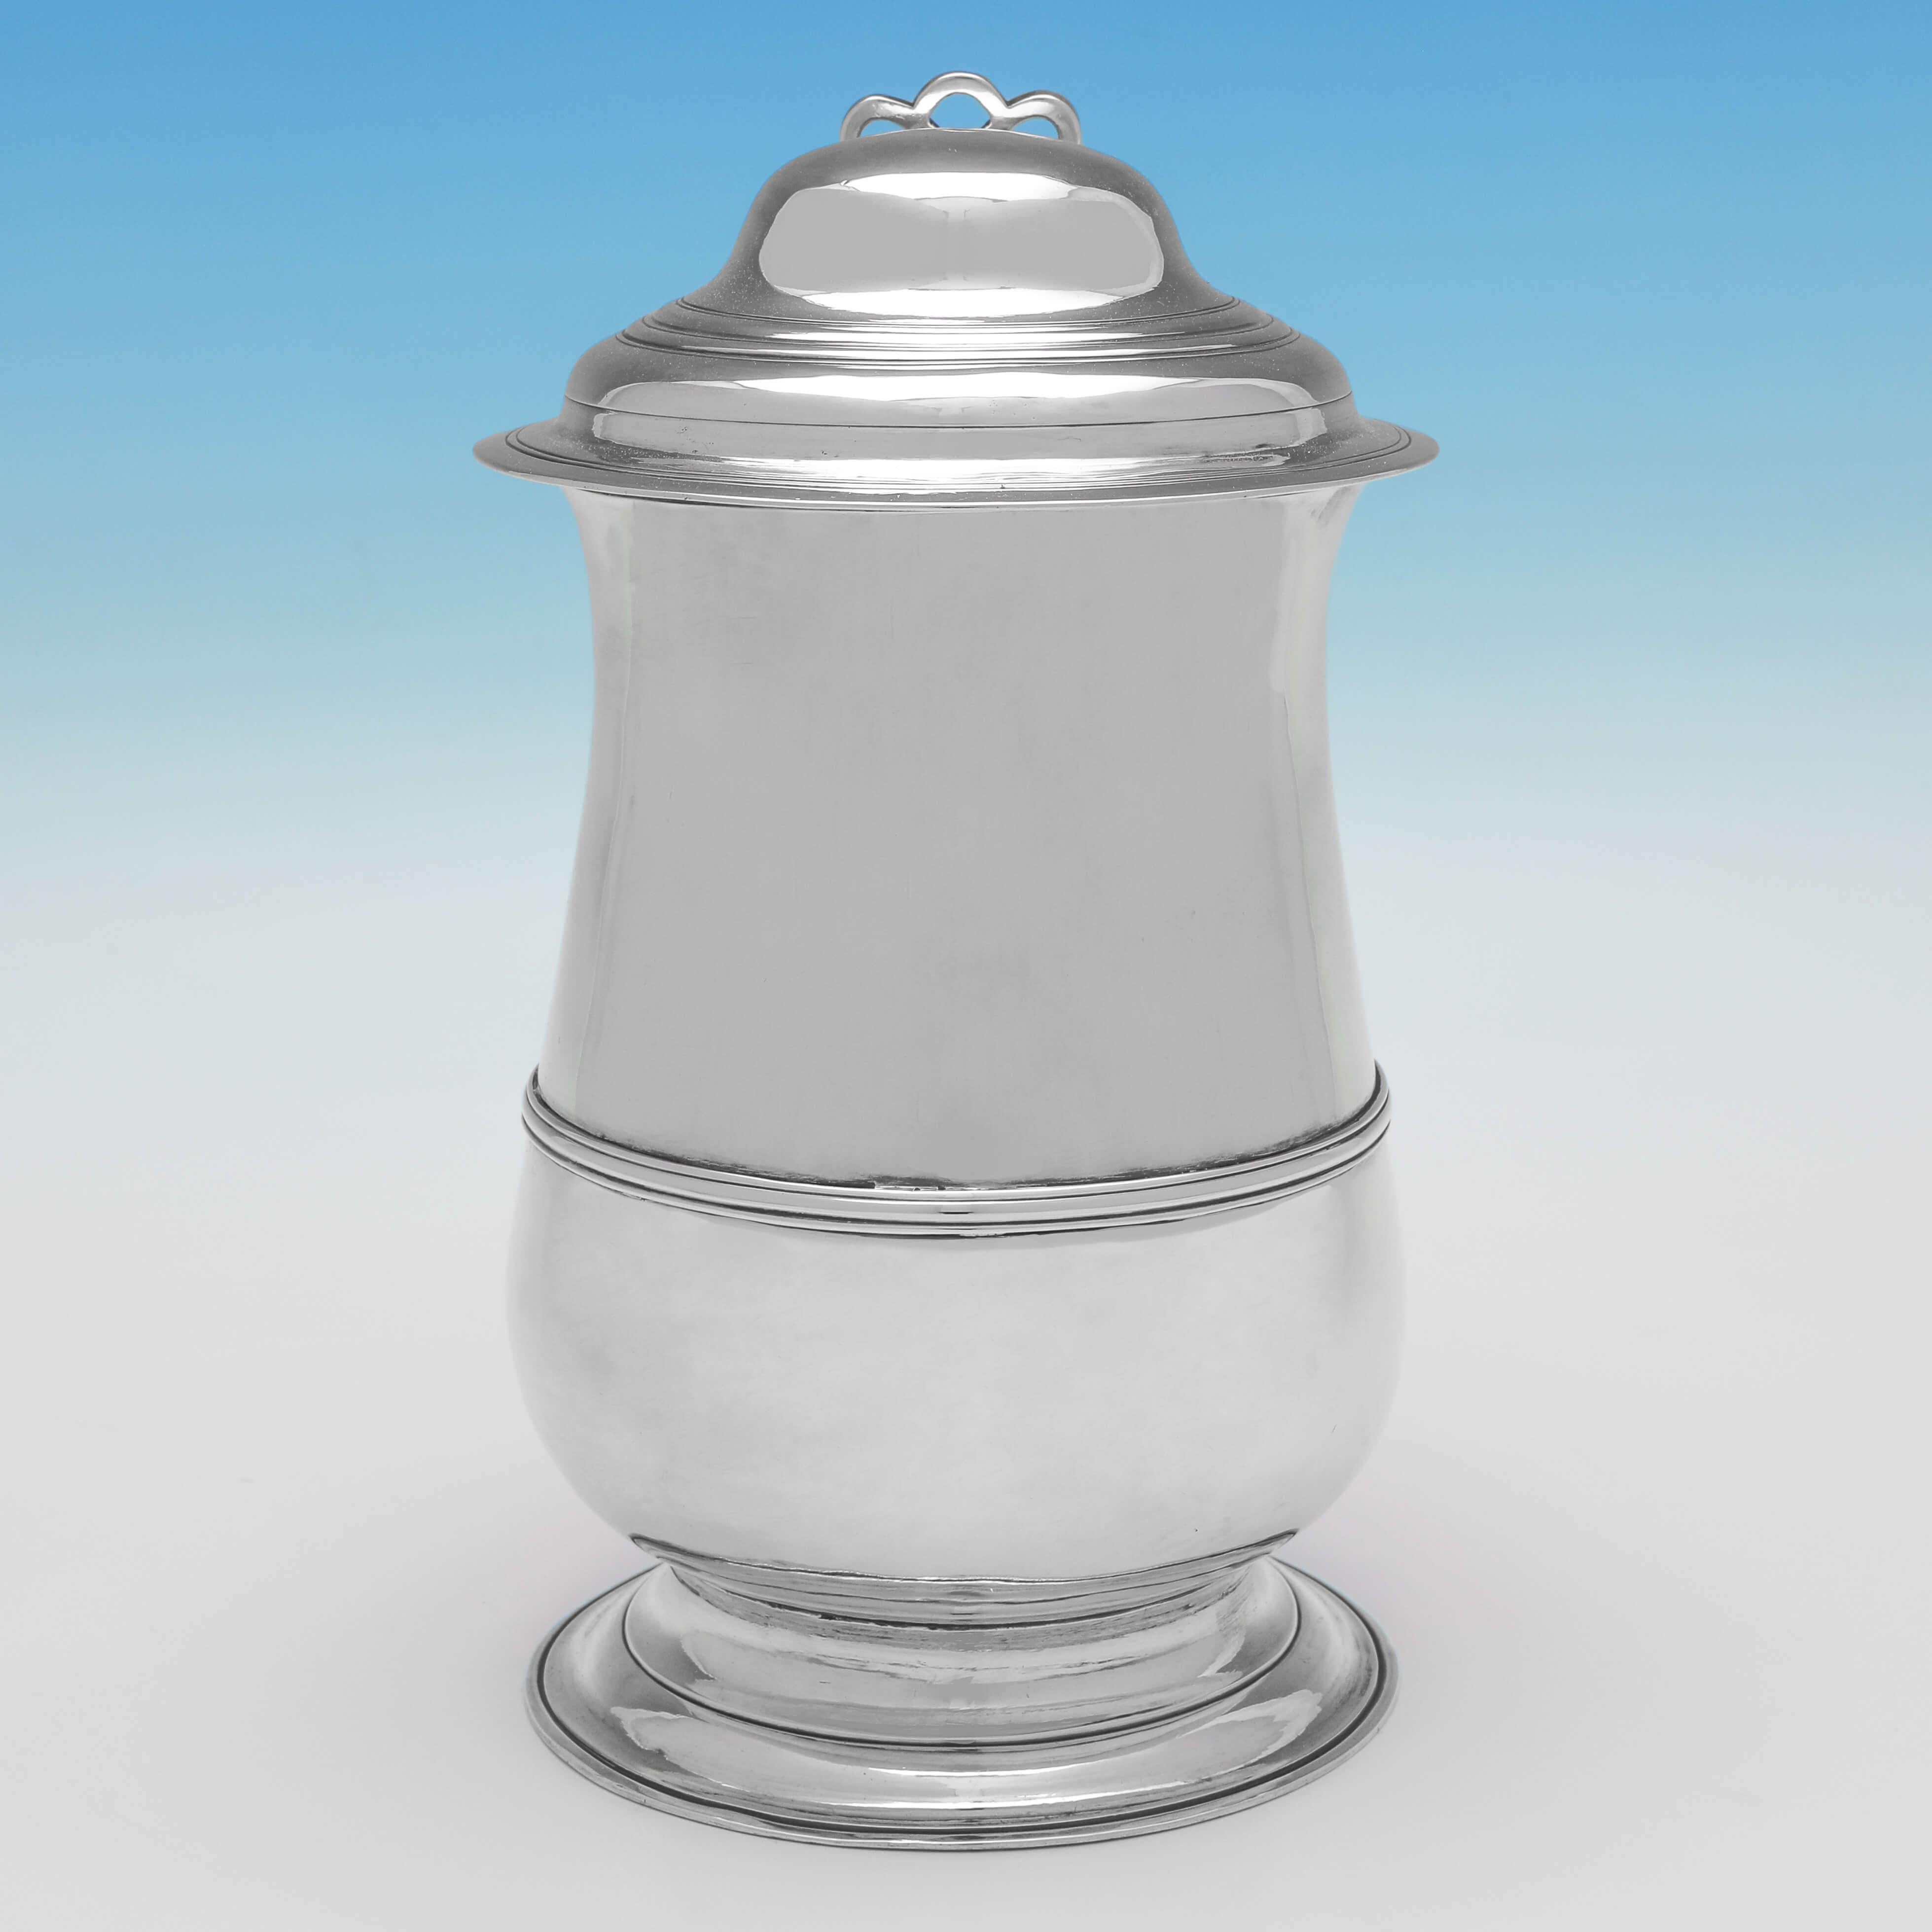 Hallmarked in London in 1773 by John Kentenber, this handsome, George III period, Antique Sterling Silver Tankard, is plain in style, featuring reed borders throughout and a dome top. 

The tankard measures 8